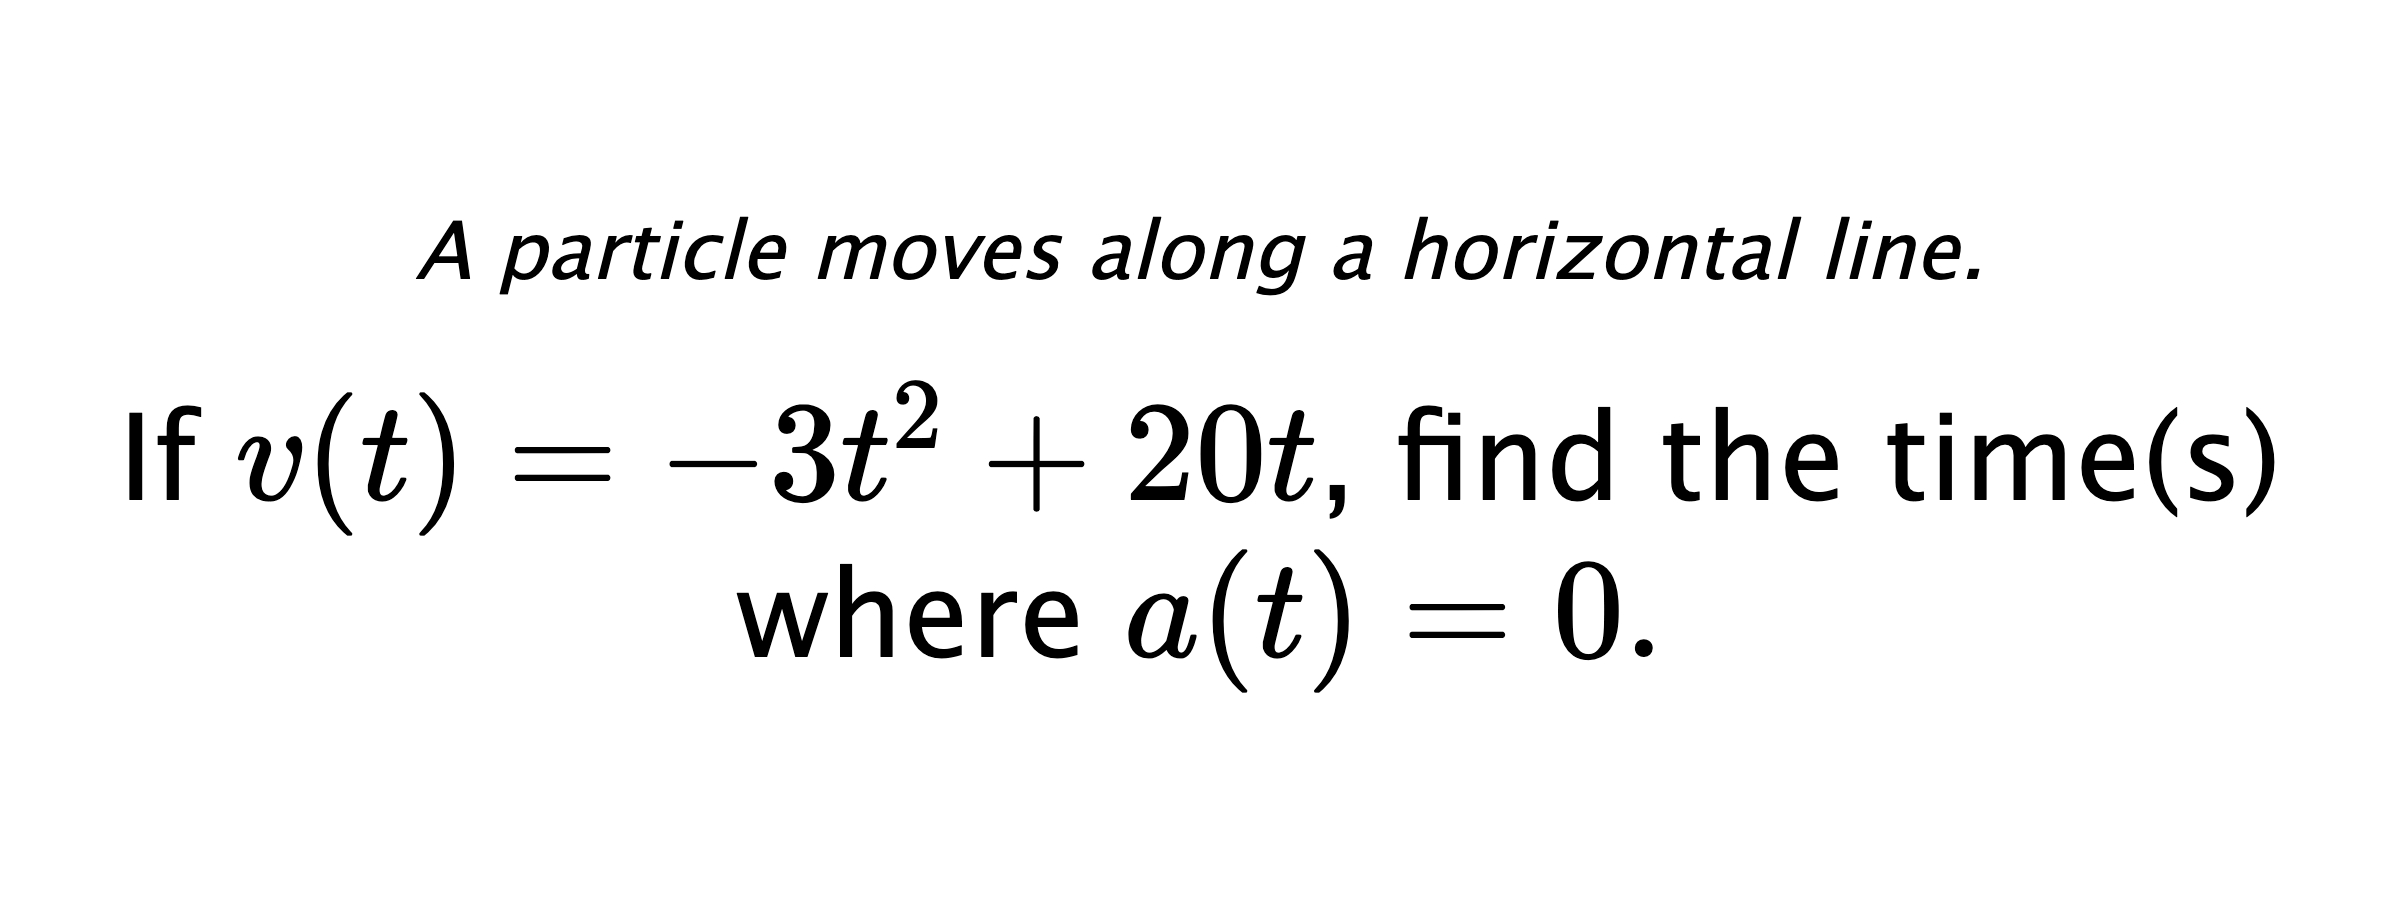 A particle moves along a horizontal line. If $ v(t)=-3t^2+20t $, find the time(s) where $ a(t)=0 .$